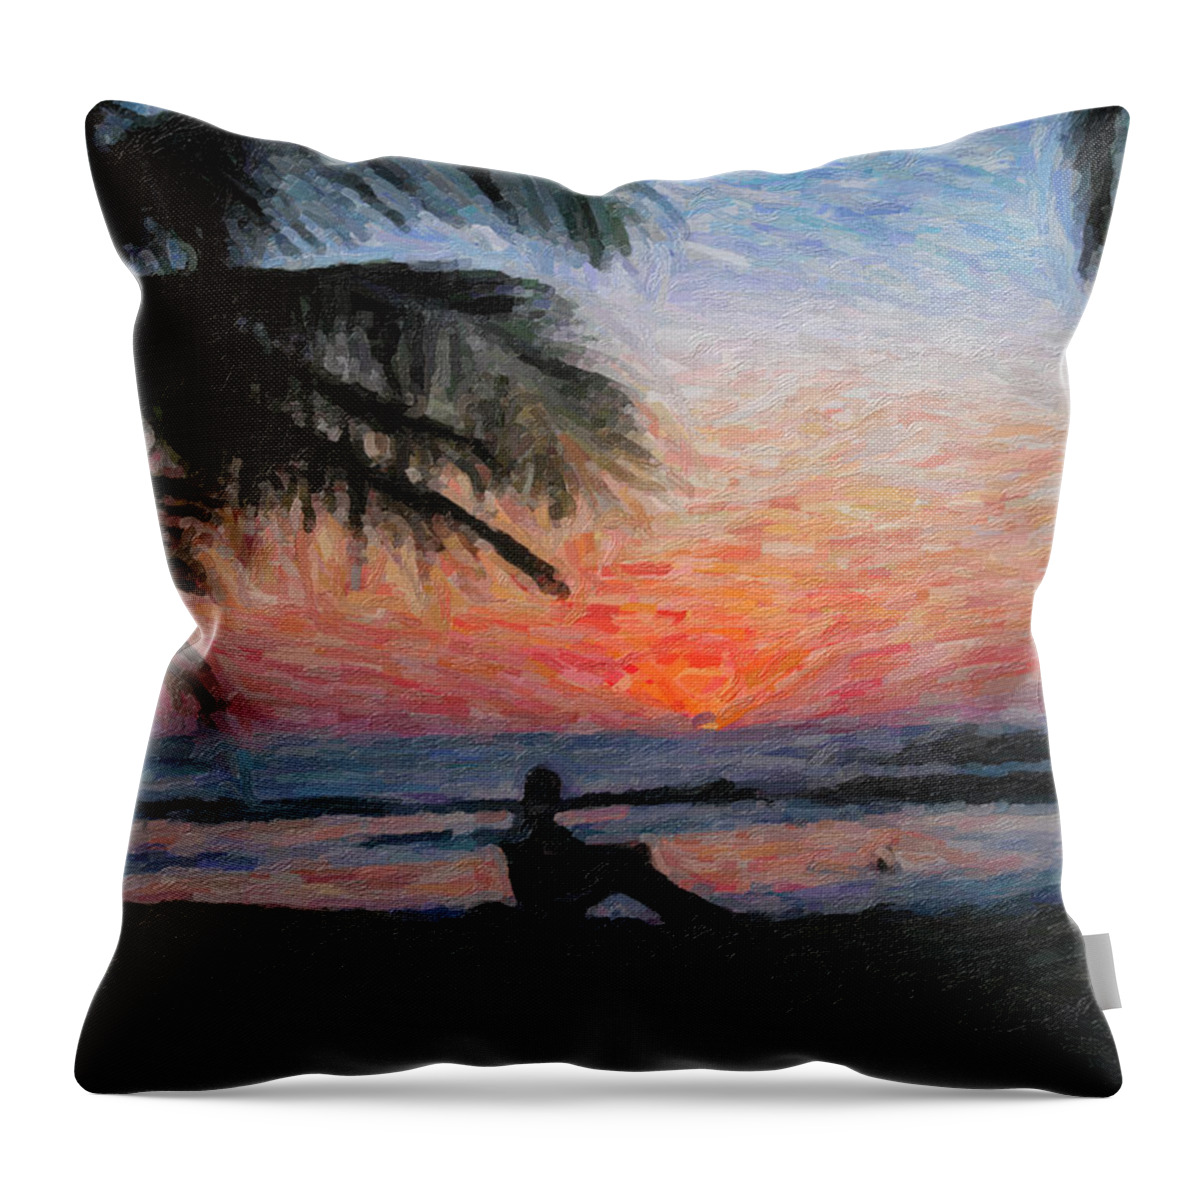 Sunset Throw Pillow featuring the painting Peaceful Sunset by David Gleeson